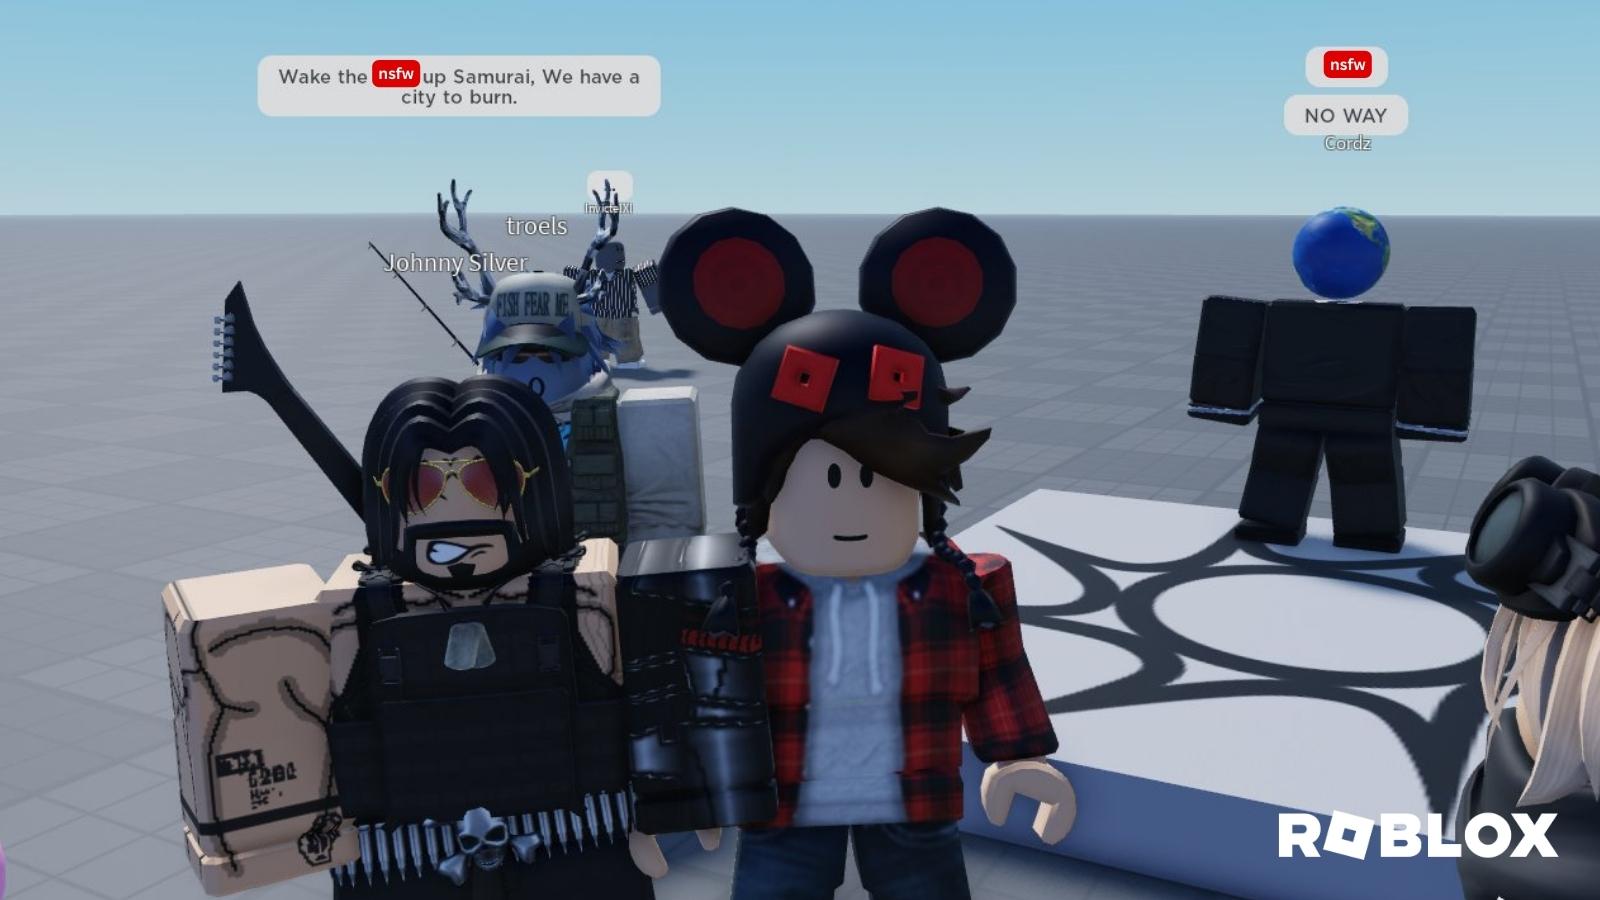 Roblox finally allows “swearing” and players are delighted - Dexerto